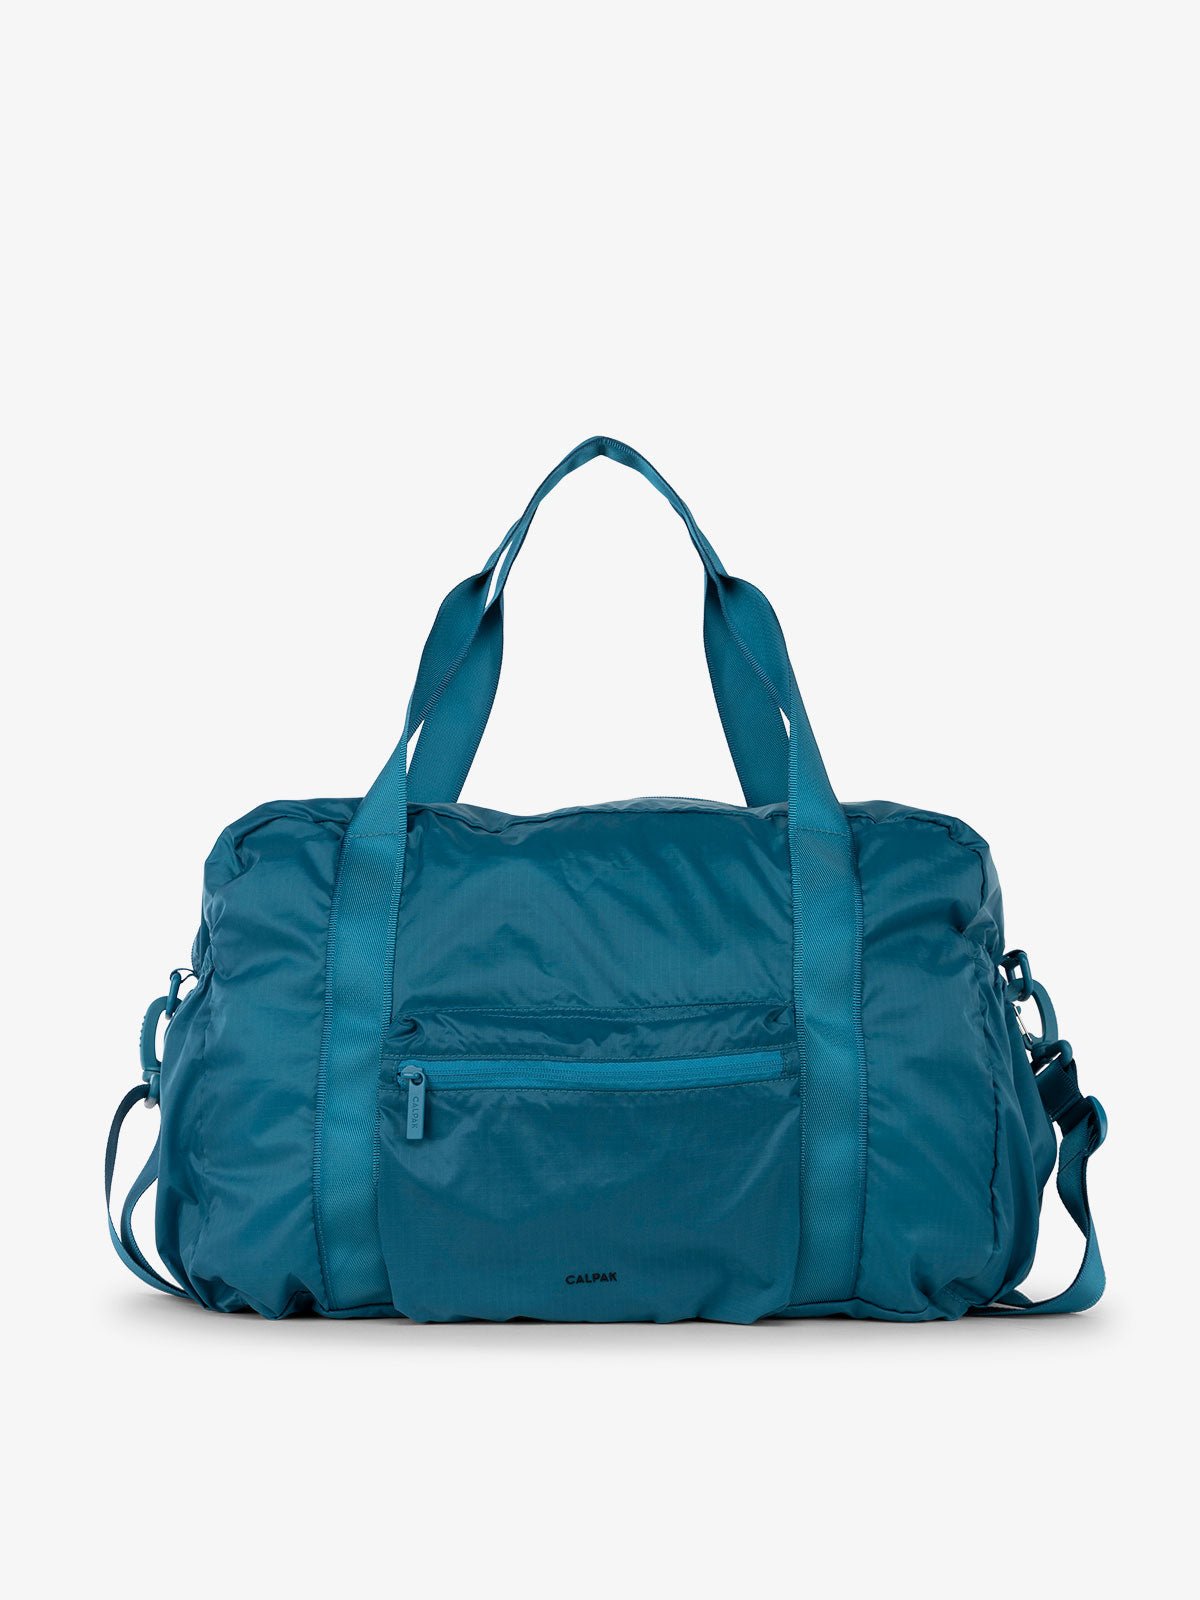 CALPAK Compakt duffel bag with removable crossbody strap and water resistant fabric in lagoon